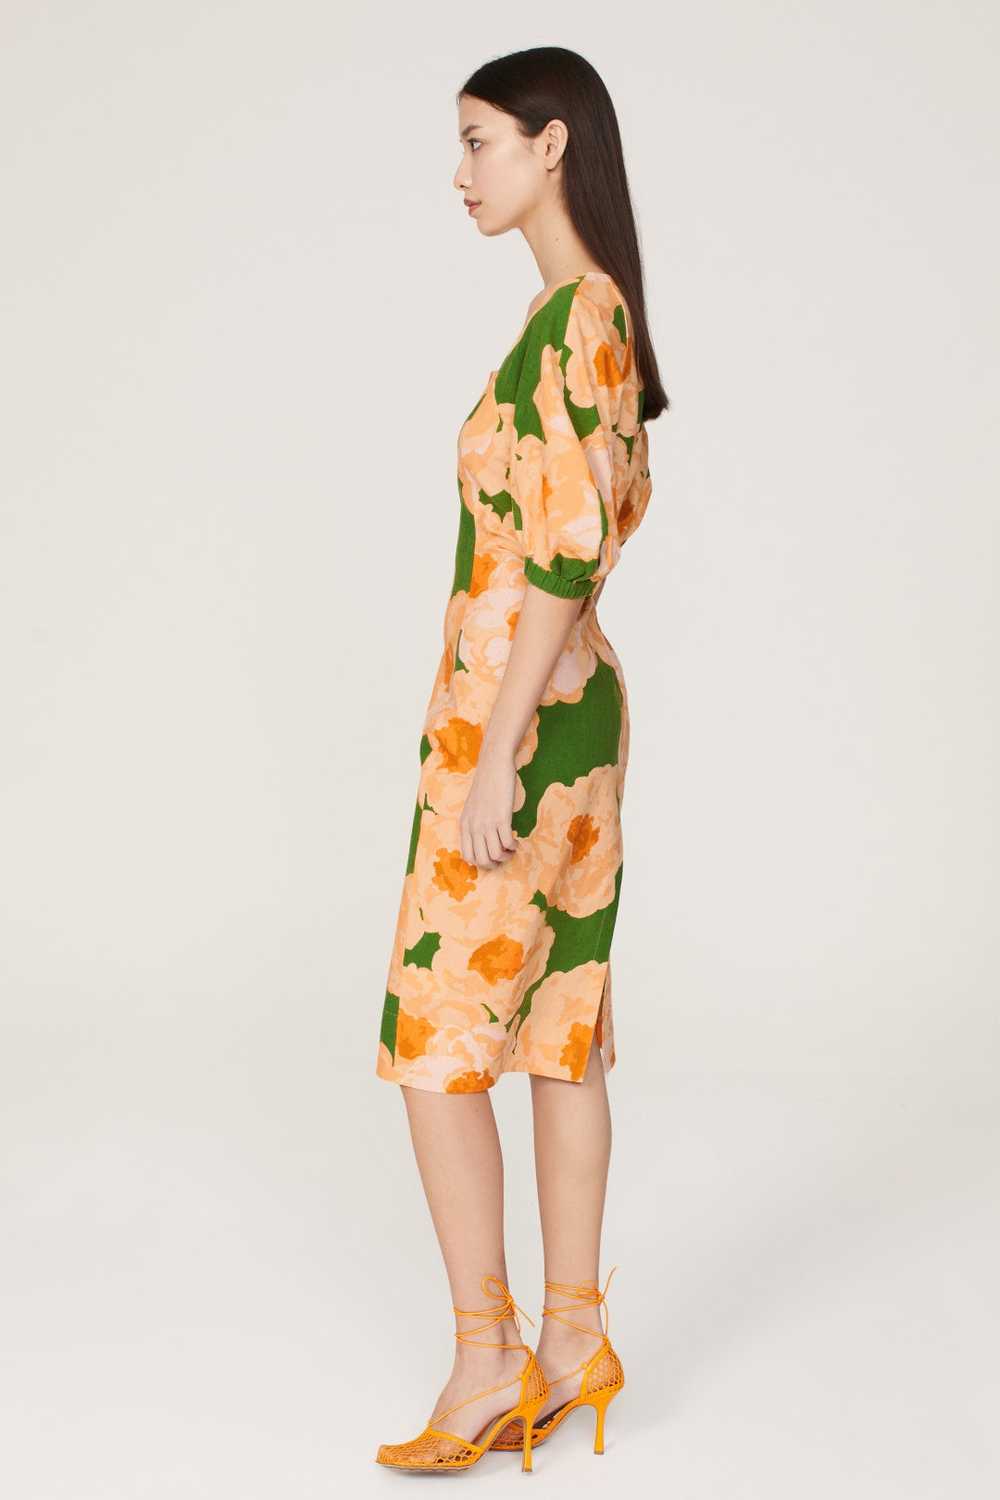 Eudon Choi Collective Puff Sleeve Dress - image 2